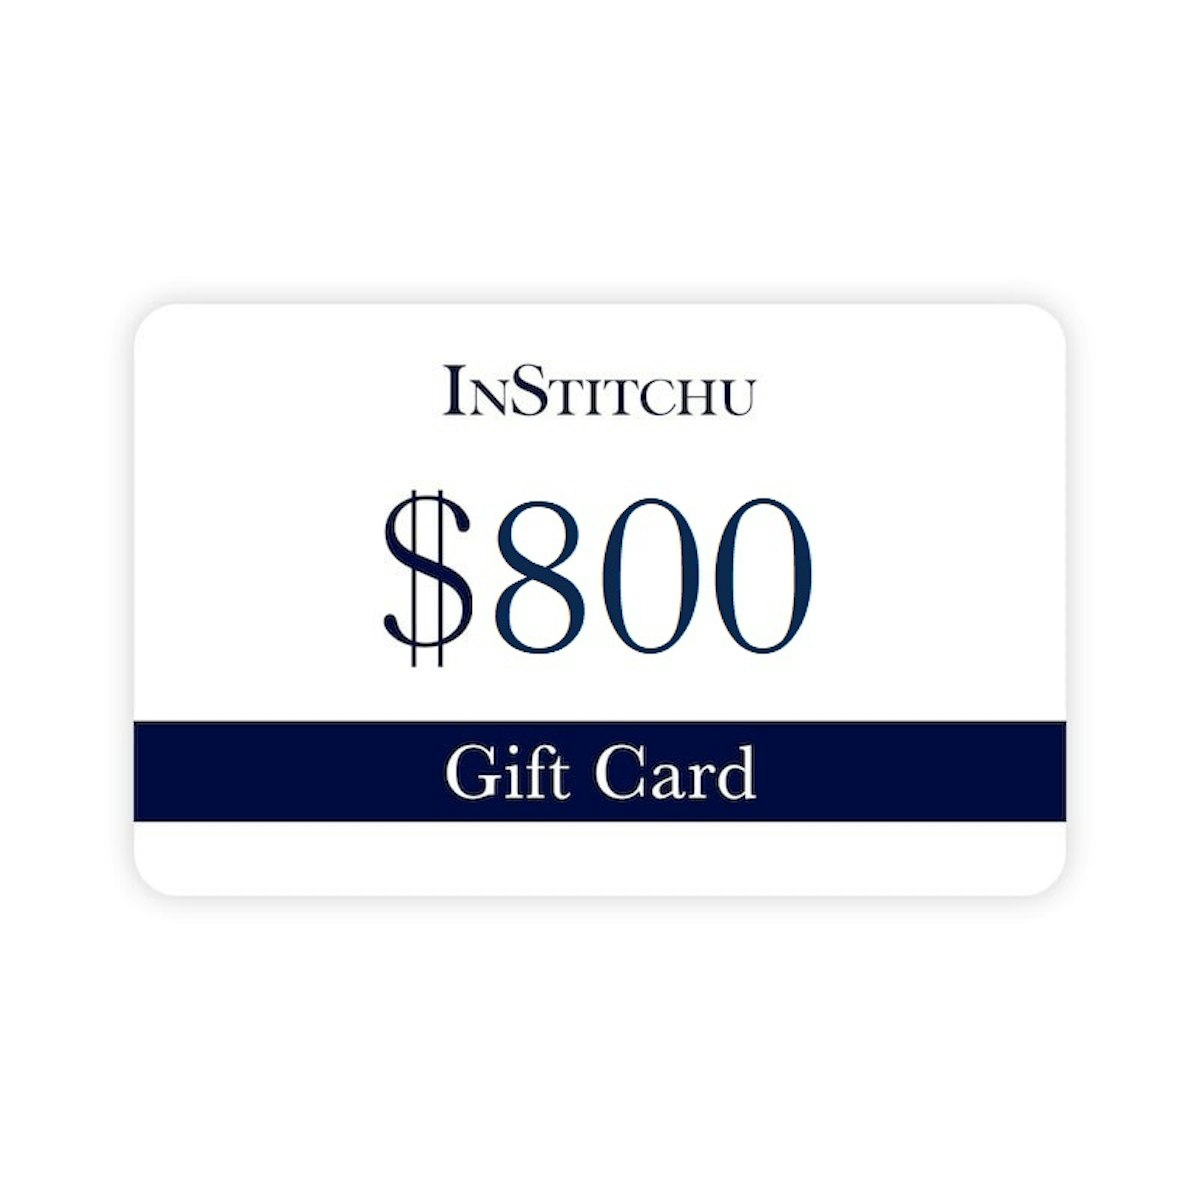 InStitchu Physical Gift Card $800